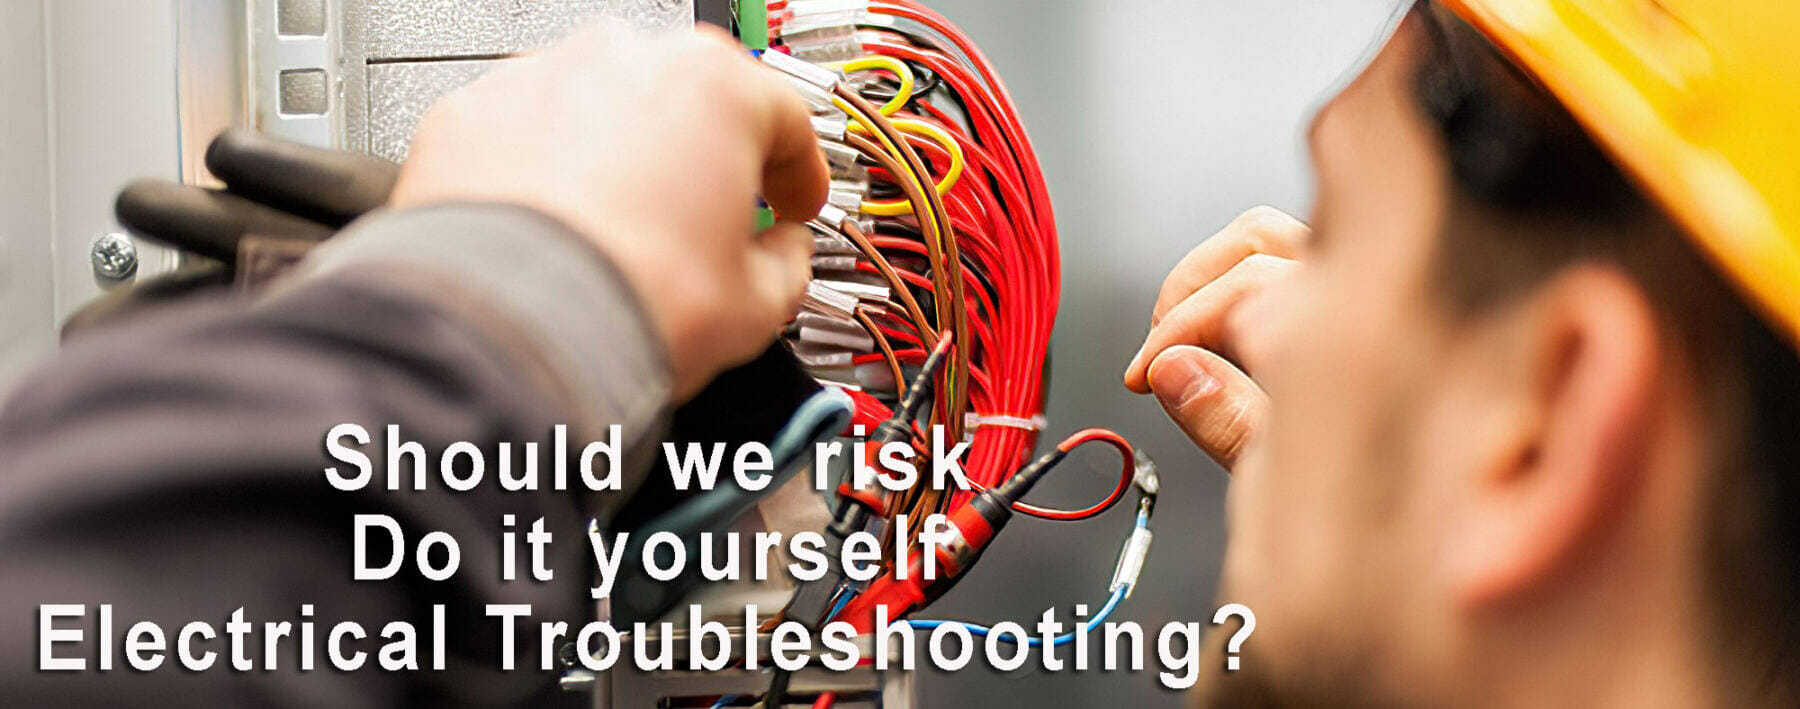 Redhawk Residential Electrical Services, Electrical Troubleshooting & Emergency Electrical Services